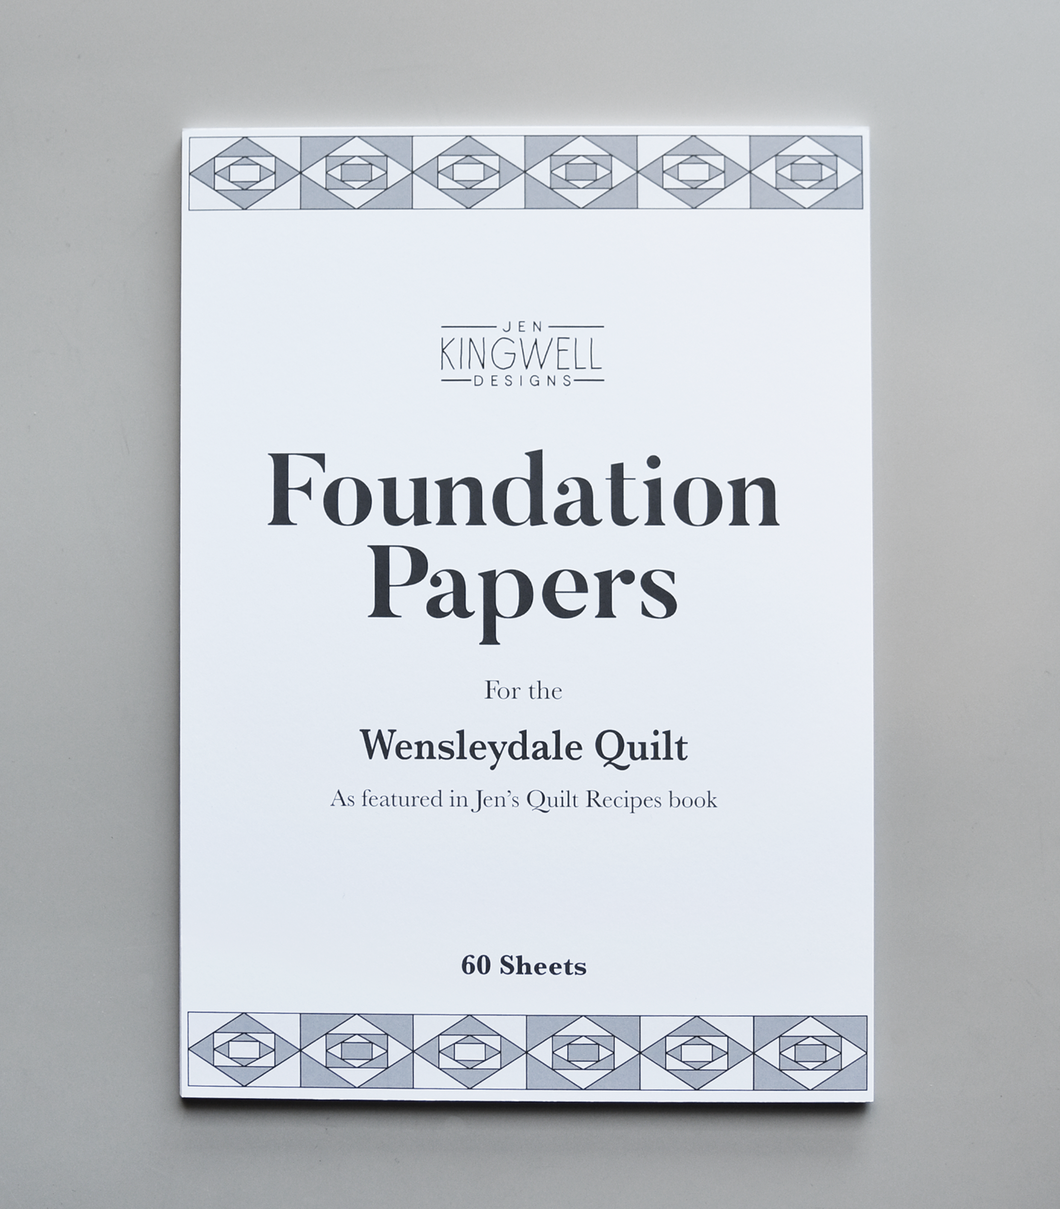 Foundation Papers for the Wensleydale Quilt - Jen Kingwell